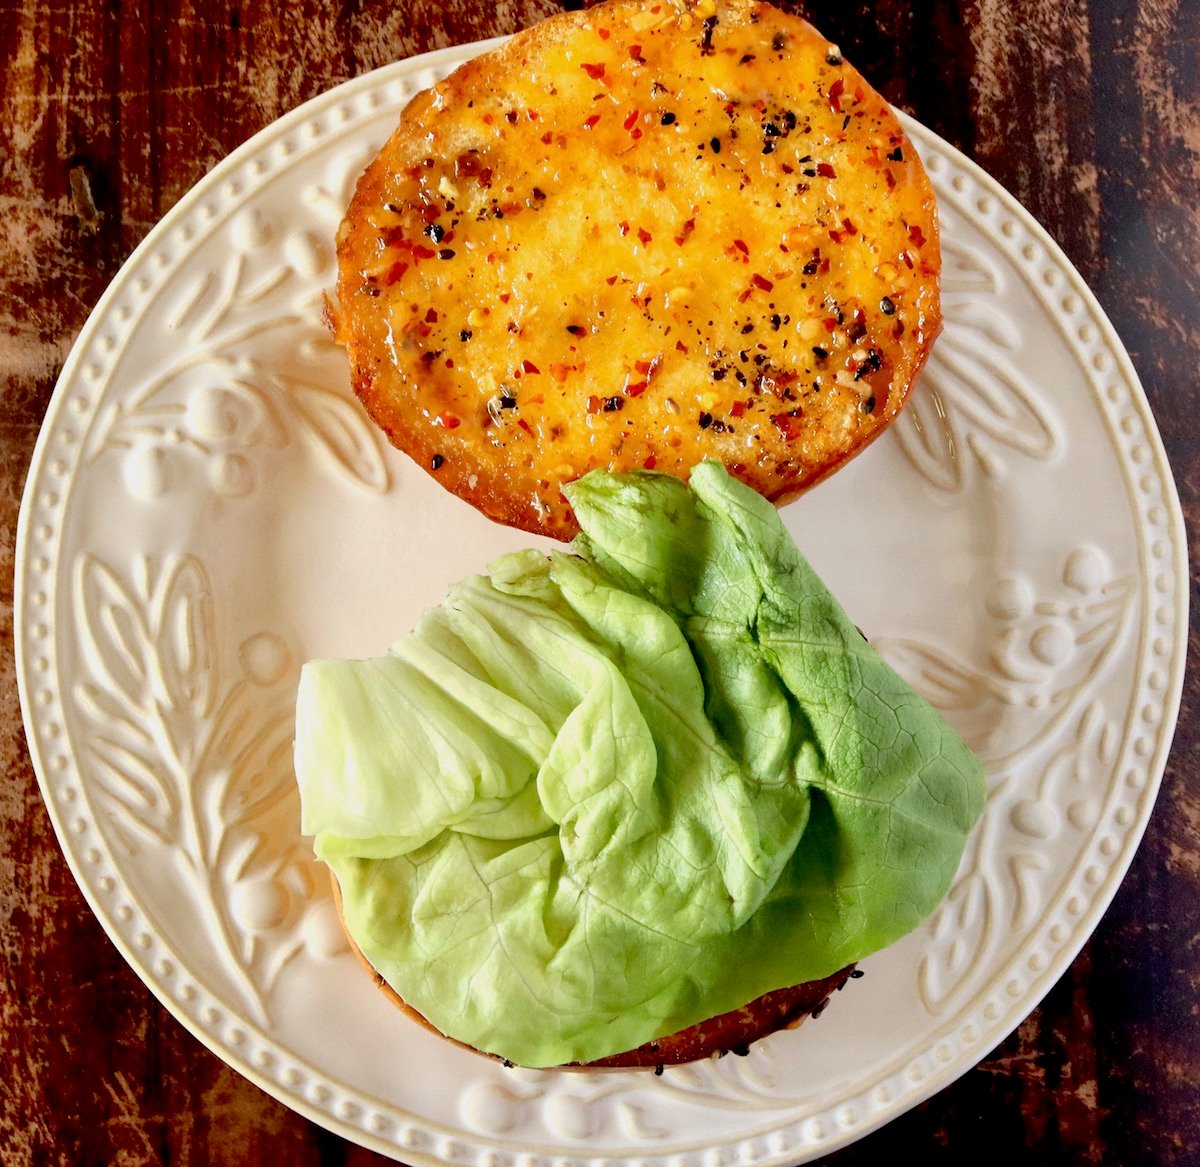 Hamburger bun with chili mayo spread over both halves, with butter lettuce on one of them.